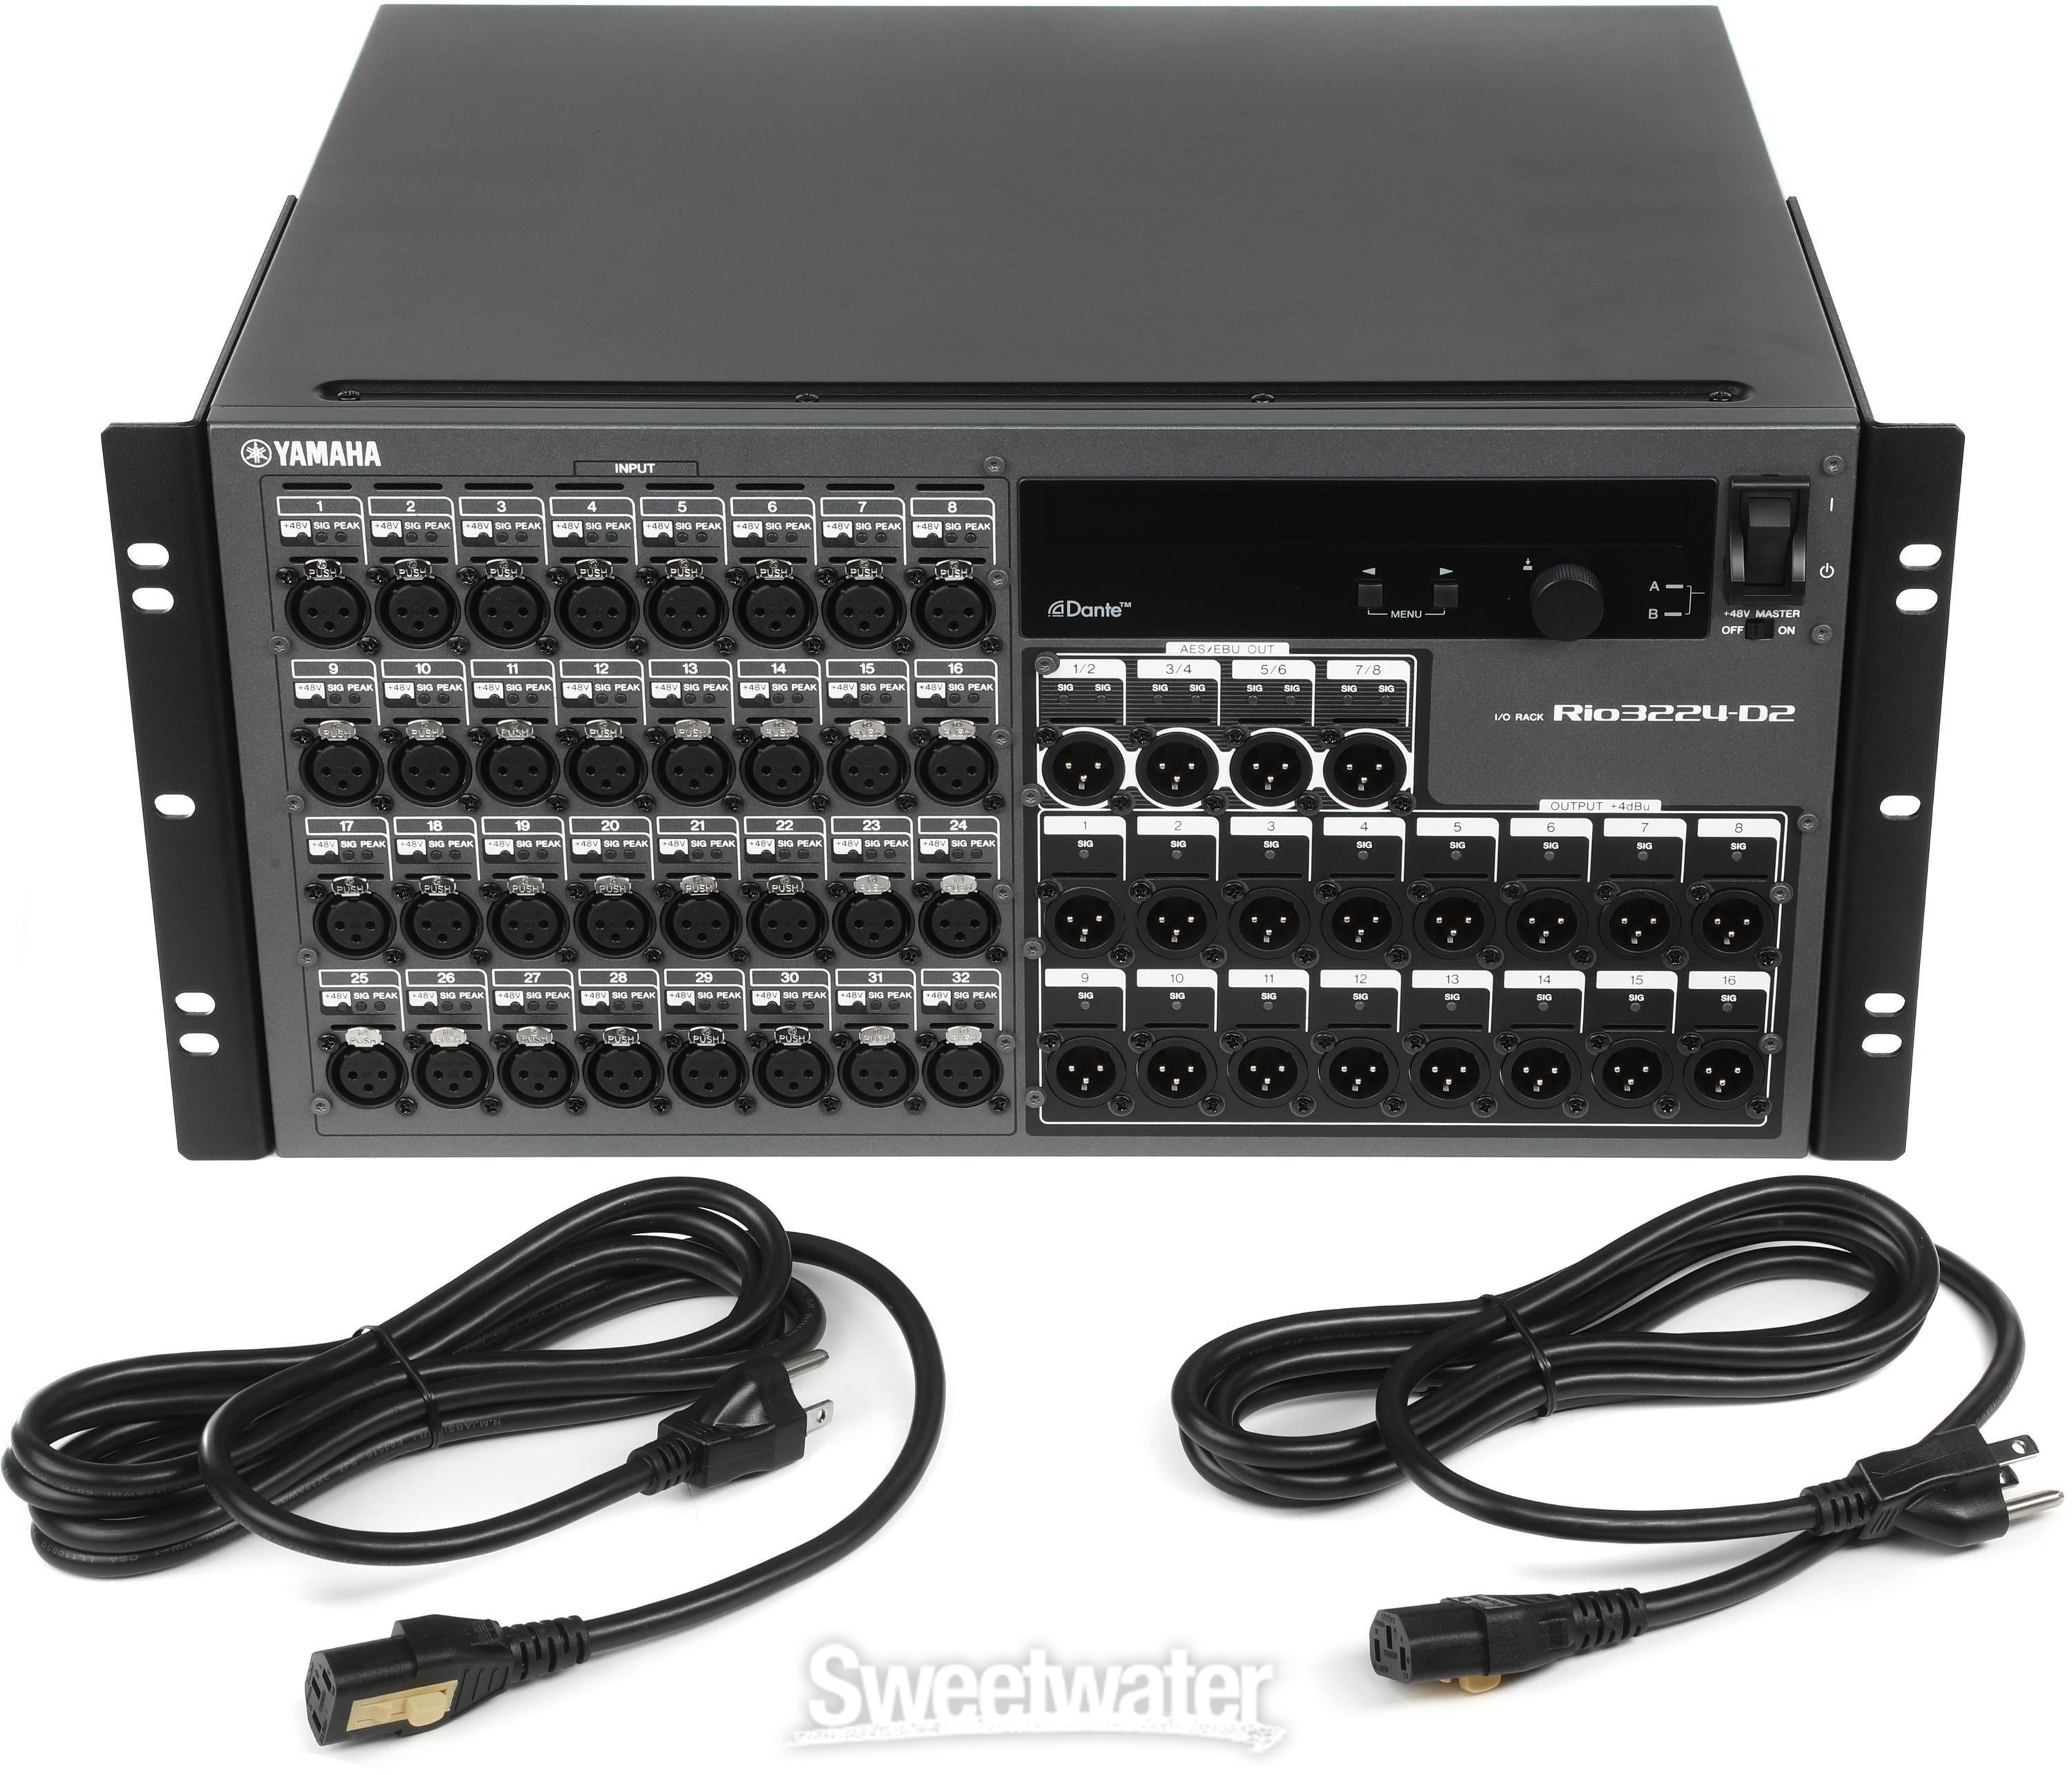 Yamaha Rio3224-D2 32-input / 24-output Dante Stage Box | Sweetwater